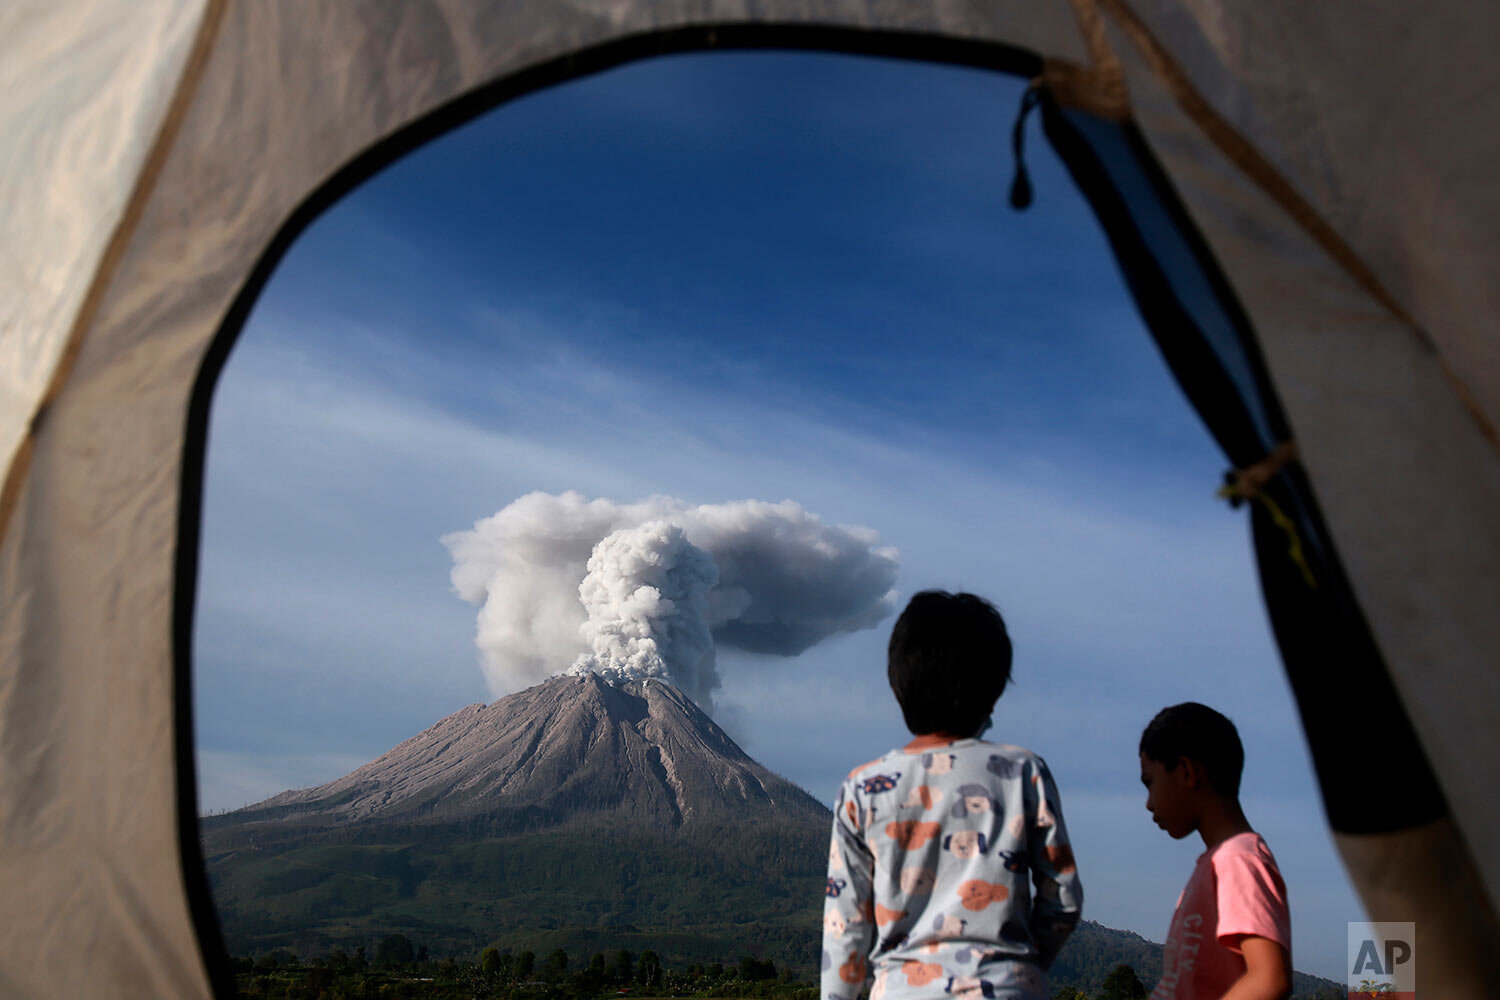  Campers are seen from the opening of a tent as they watch Mount Sinabung erupting in Karo, North Sumatra, Indonesia, Thursday, March 11, 2021. (AP Photo/Binsar Bakkara) 